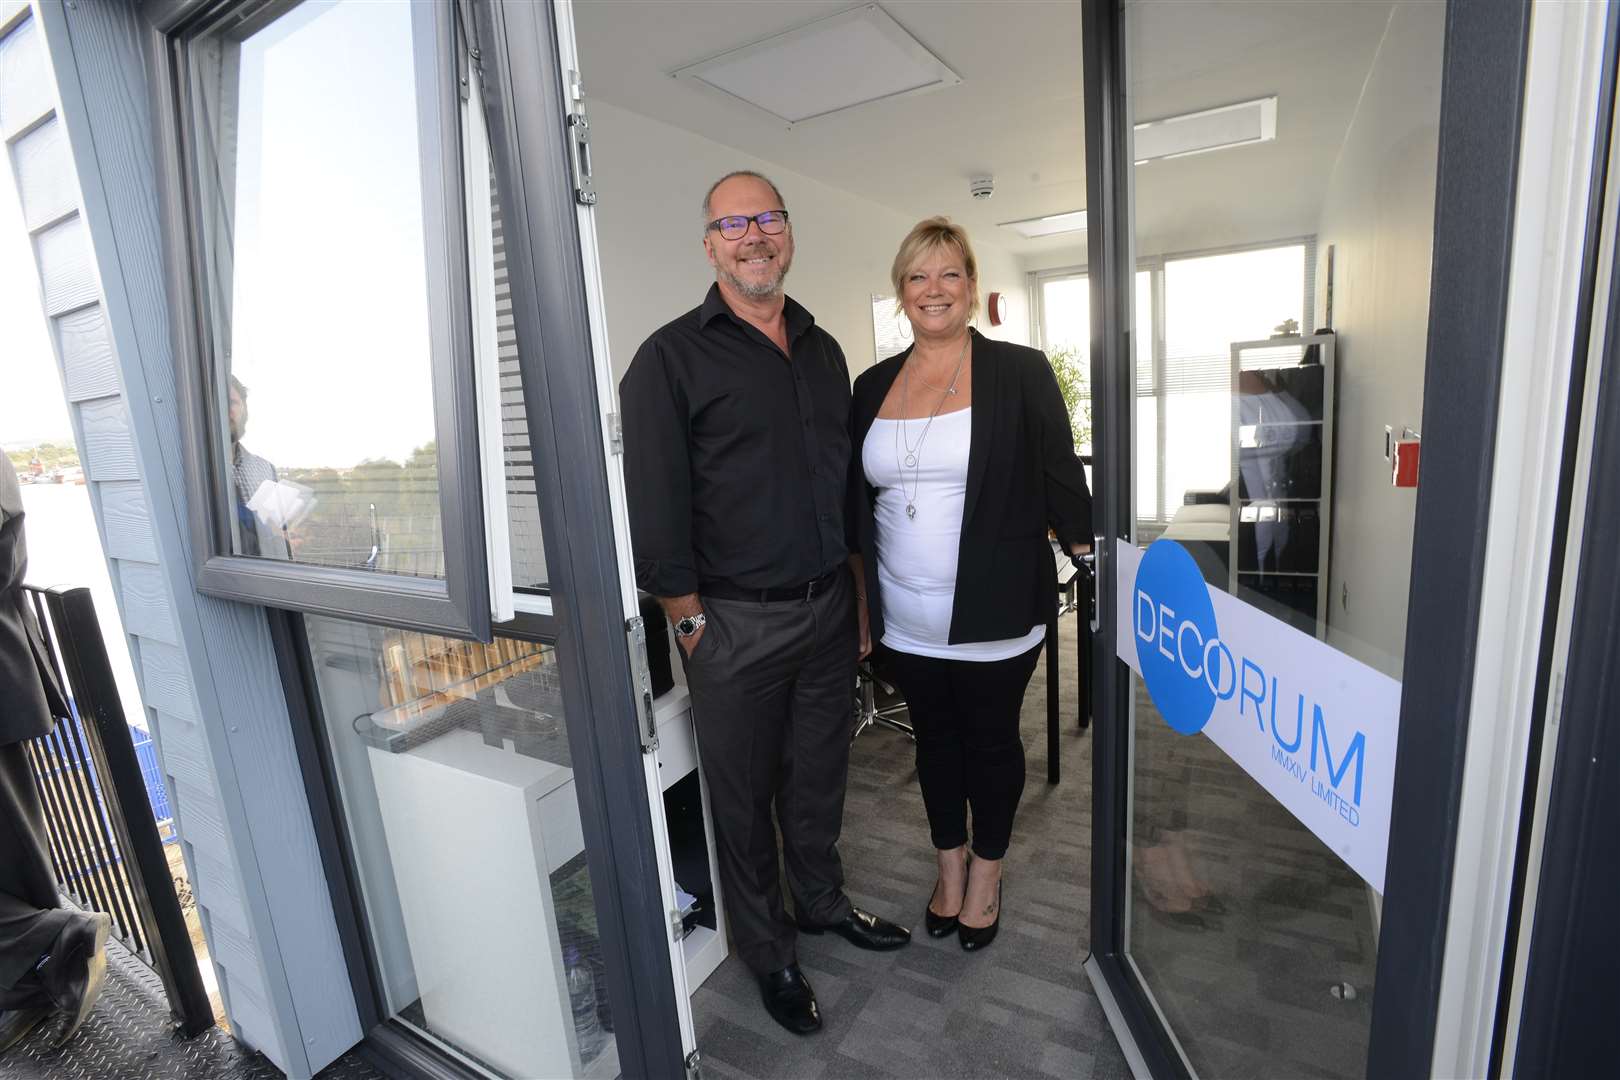 Ian and Kerry Patrick from Decorum were very happy with their new home. Picture: Gary Browne